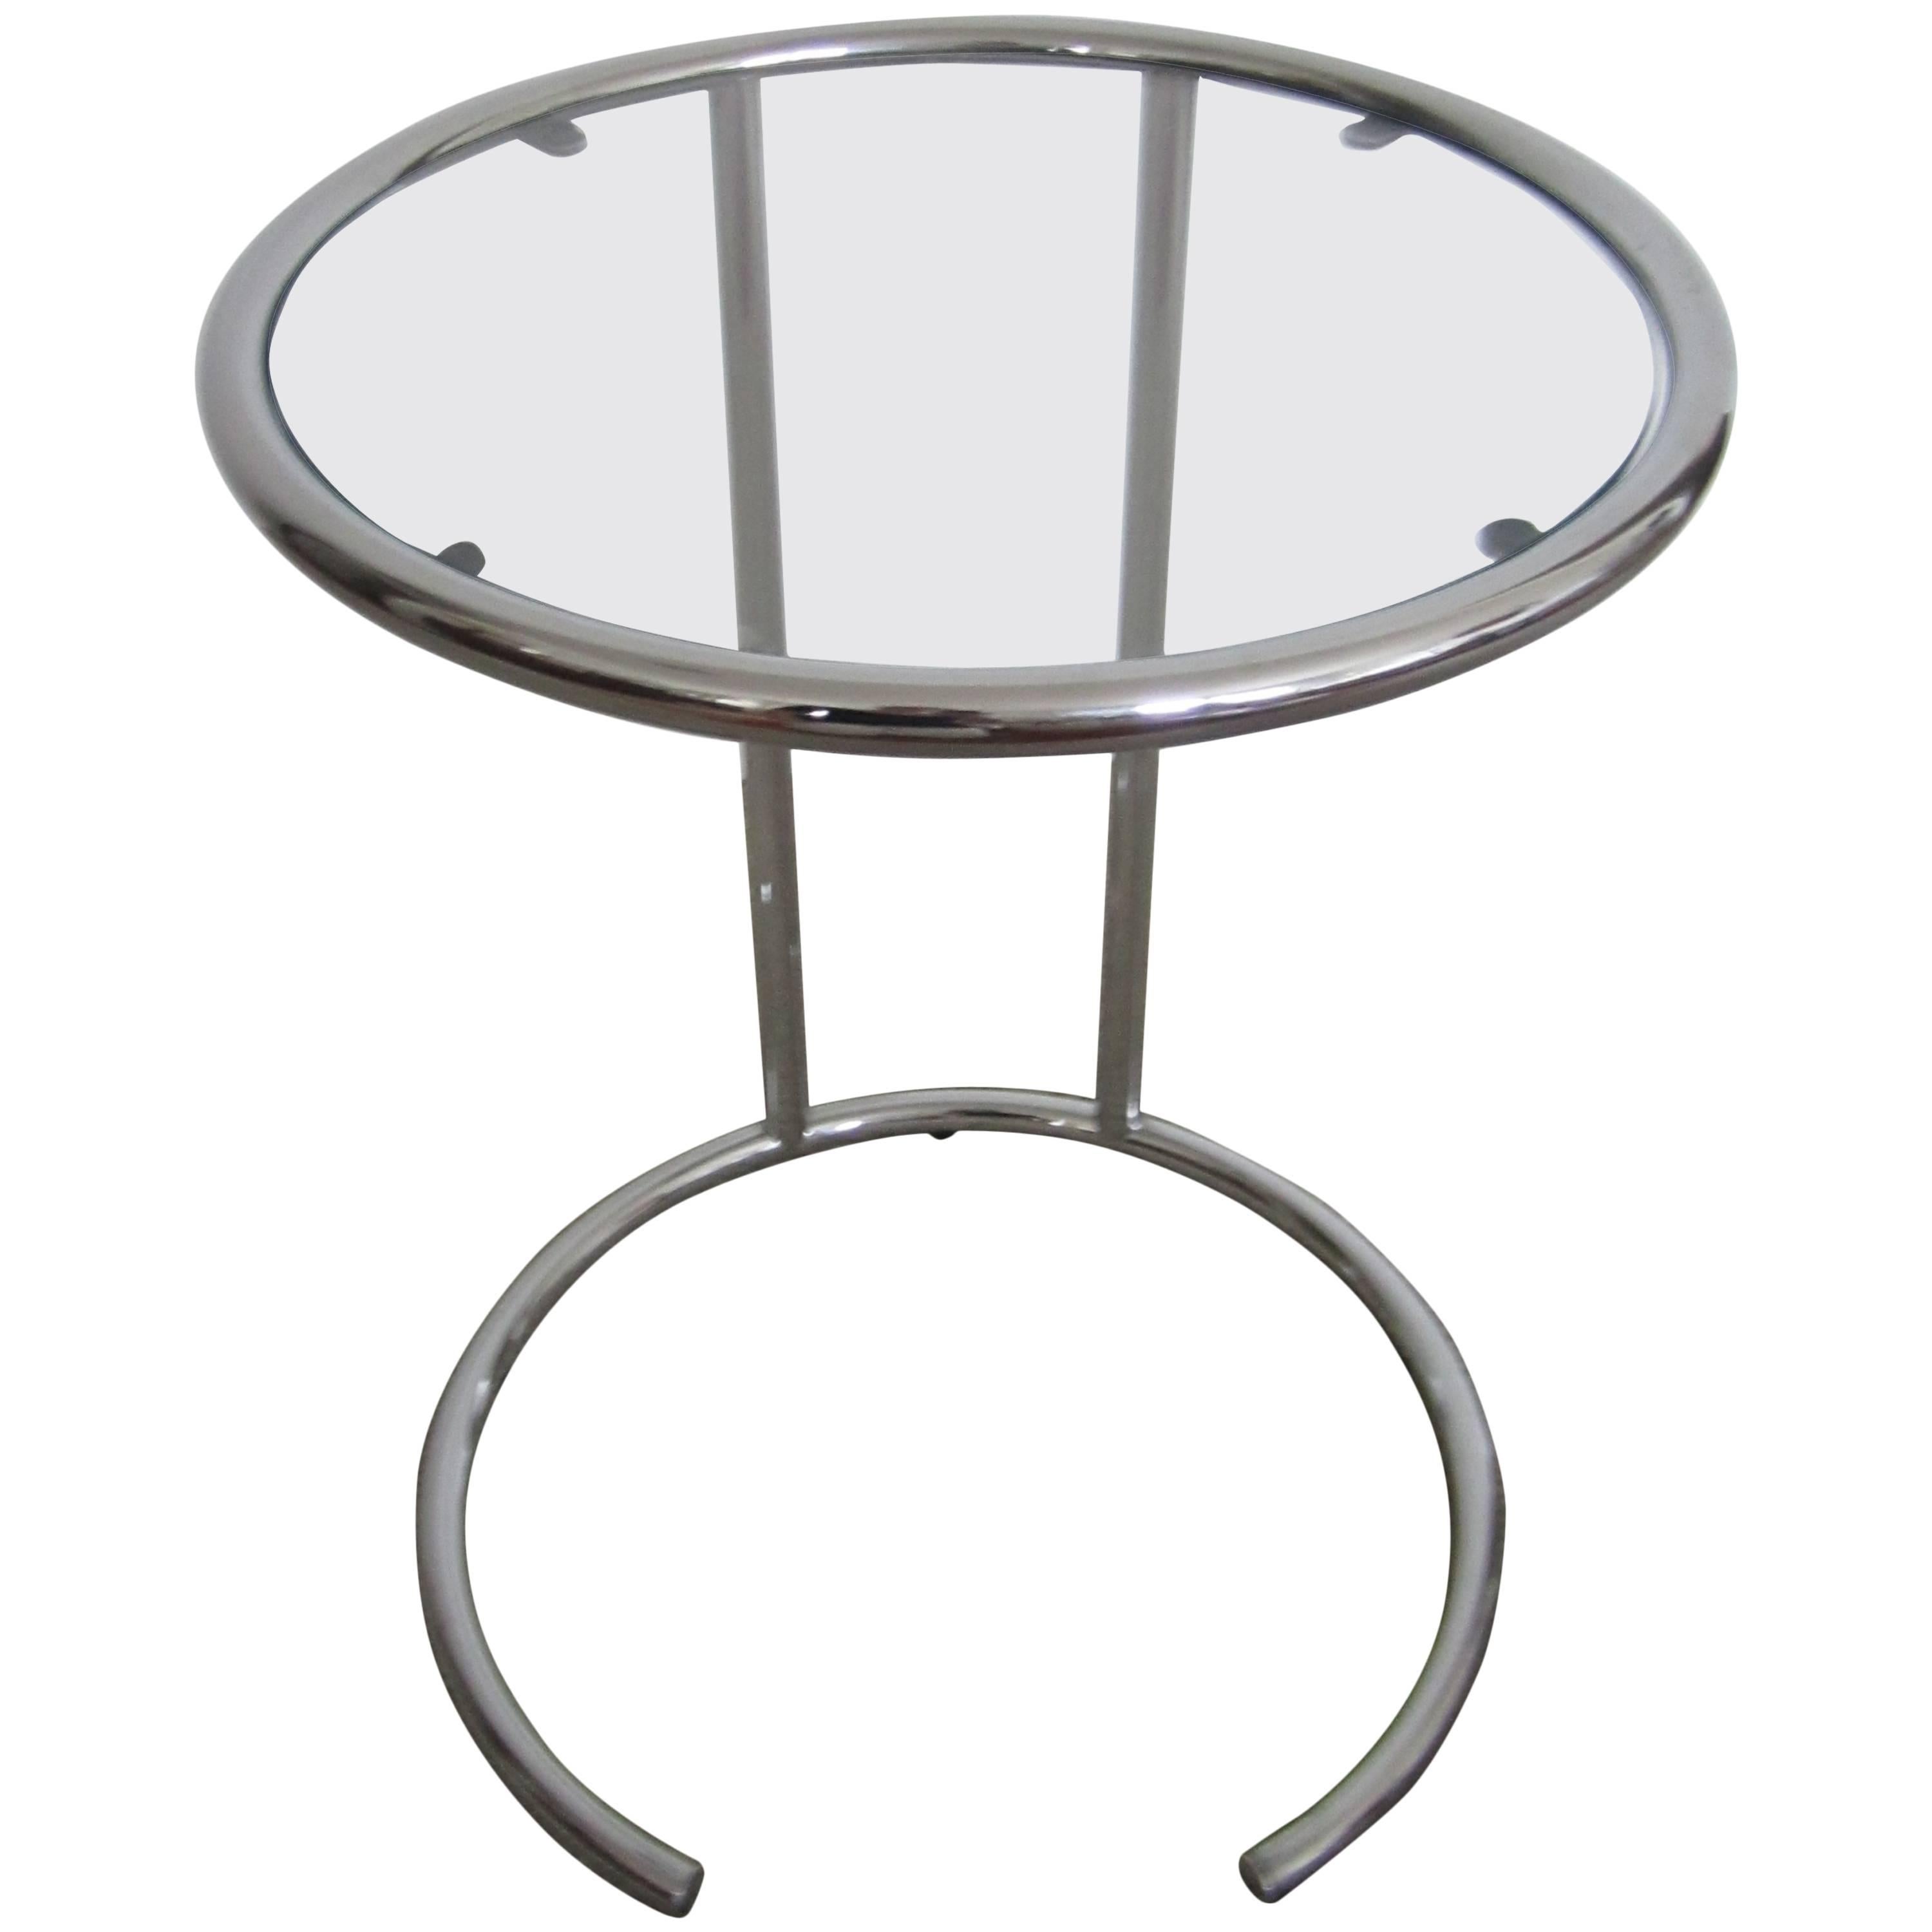 Vintage Modern Italian Chrome and Glass Side Table, Italy, 1970s